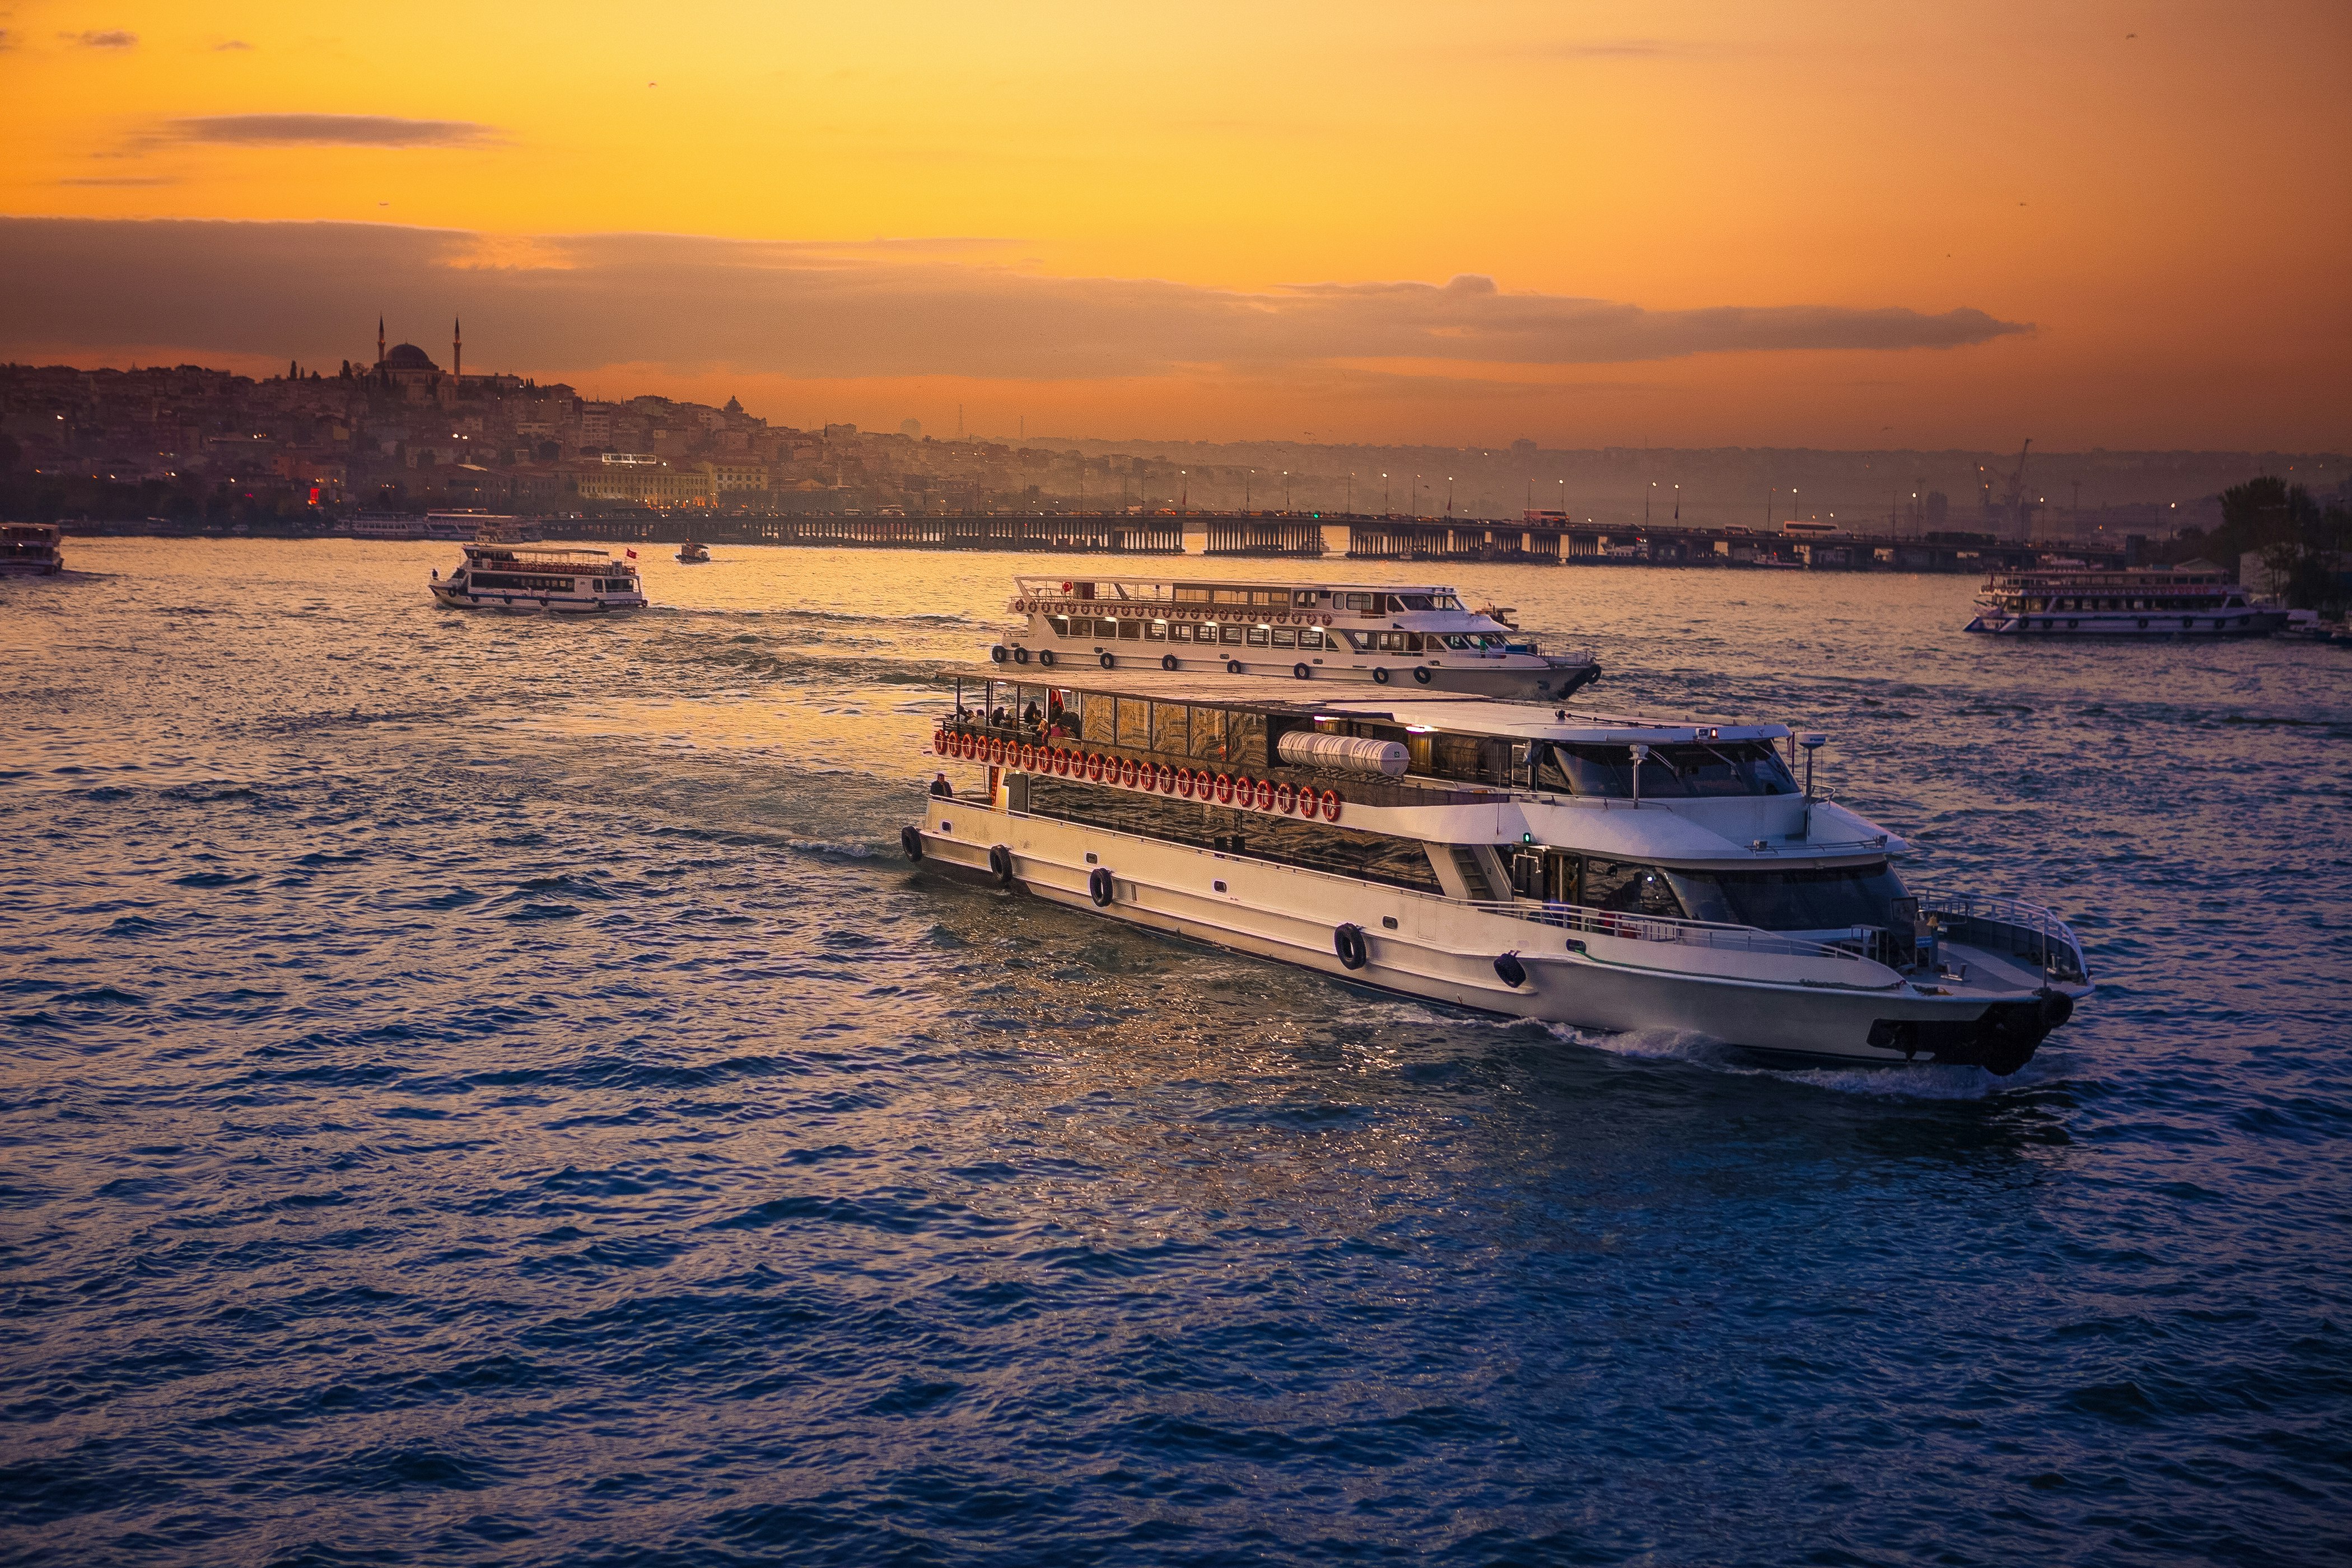 Boats motor along the Bosphorus in Turkey with the Istanbul skyline in the background